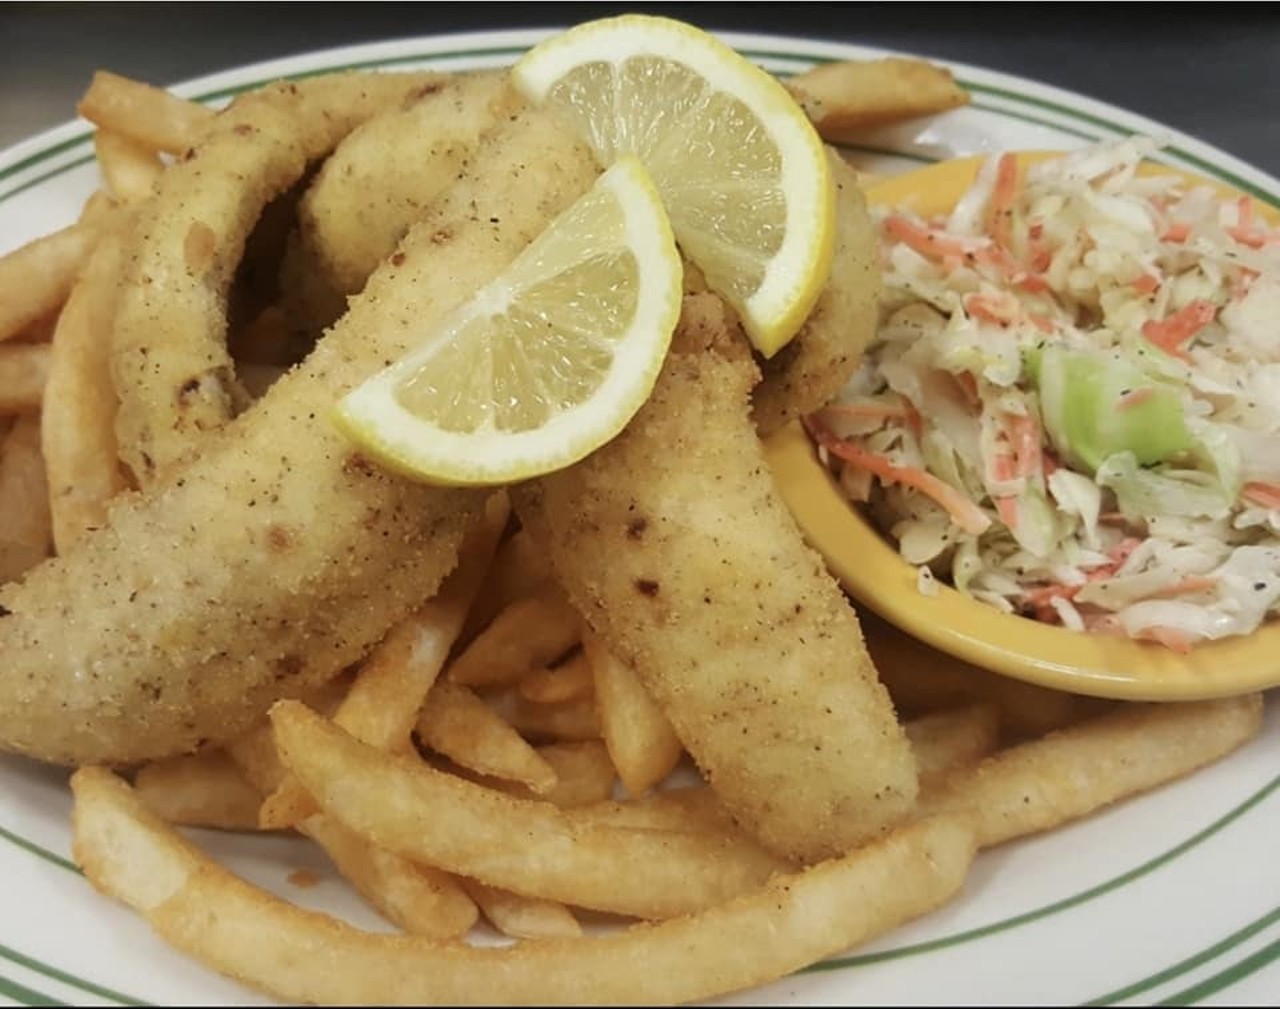  Loco Leprechaun
24545 Center Ridge Rd., Westlake
Yes, there&#146;s a bar named the Loco Leprechaun and of course they have a Friday fish fry. Every Friday during Lent, they&#146;ll serve panko hand breaded Lake Erie perch with jumbo handmade potato and cheese pierogies and slaw.
Photo via Loco Leprechaun/Facebook